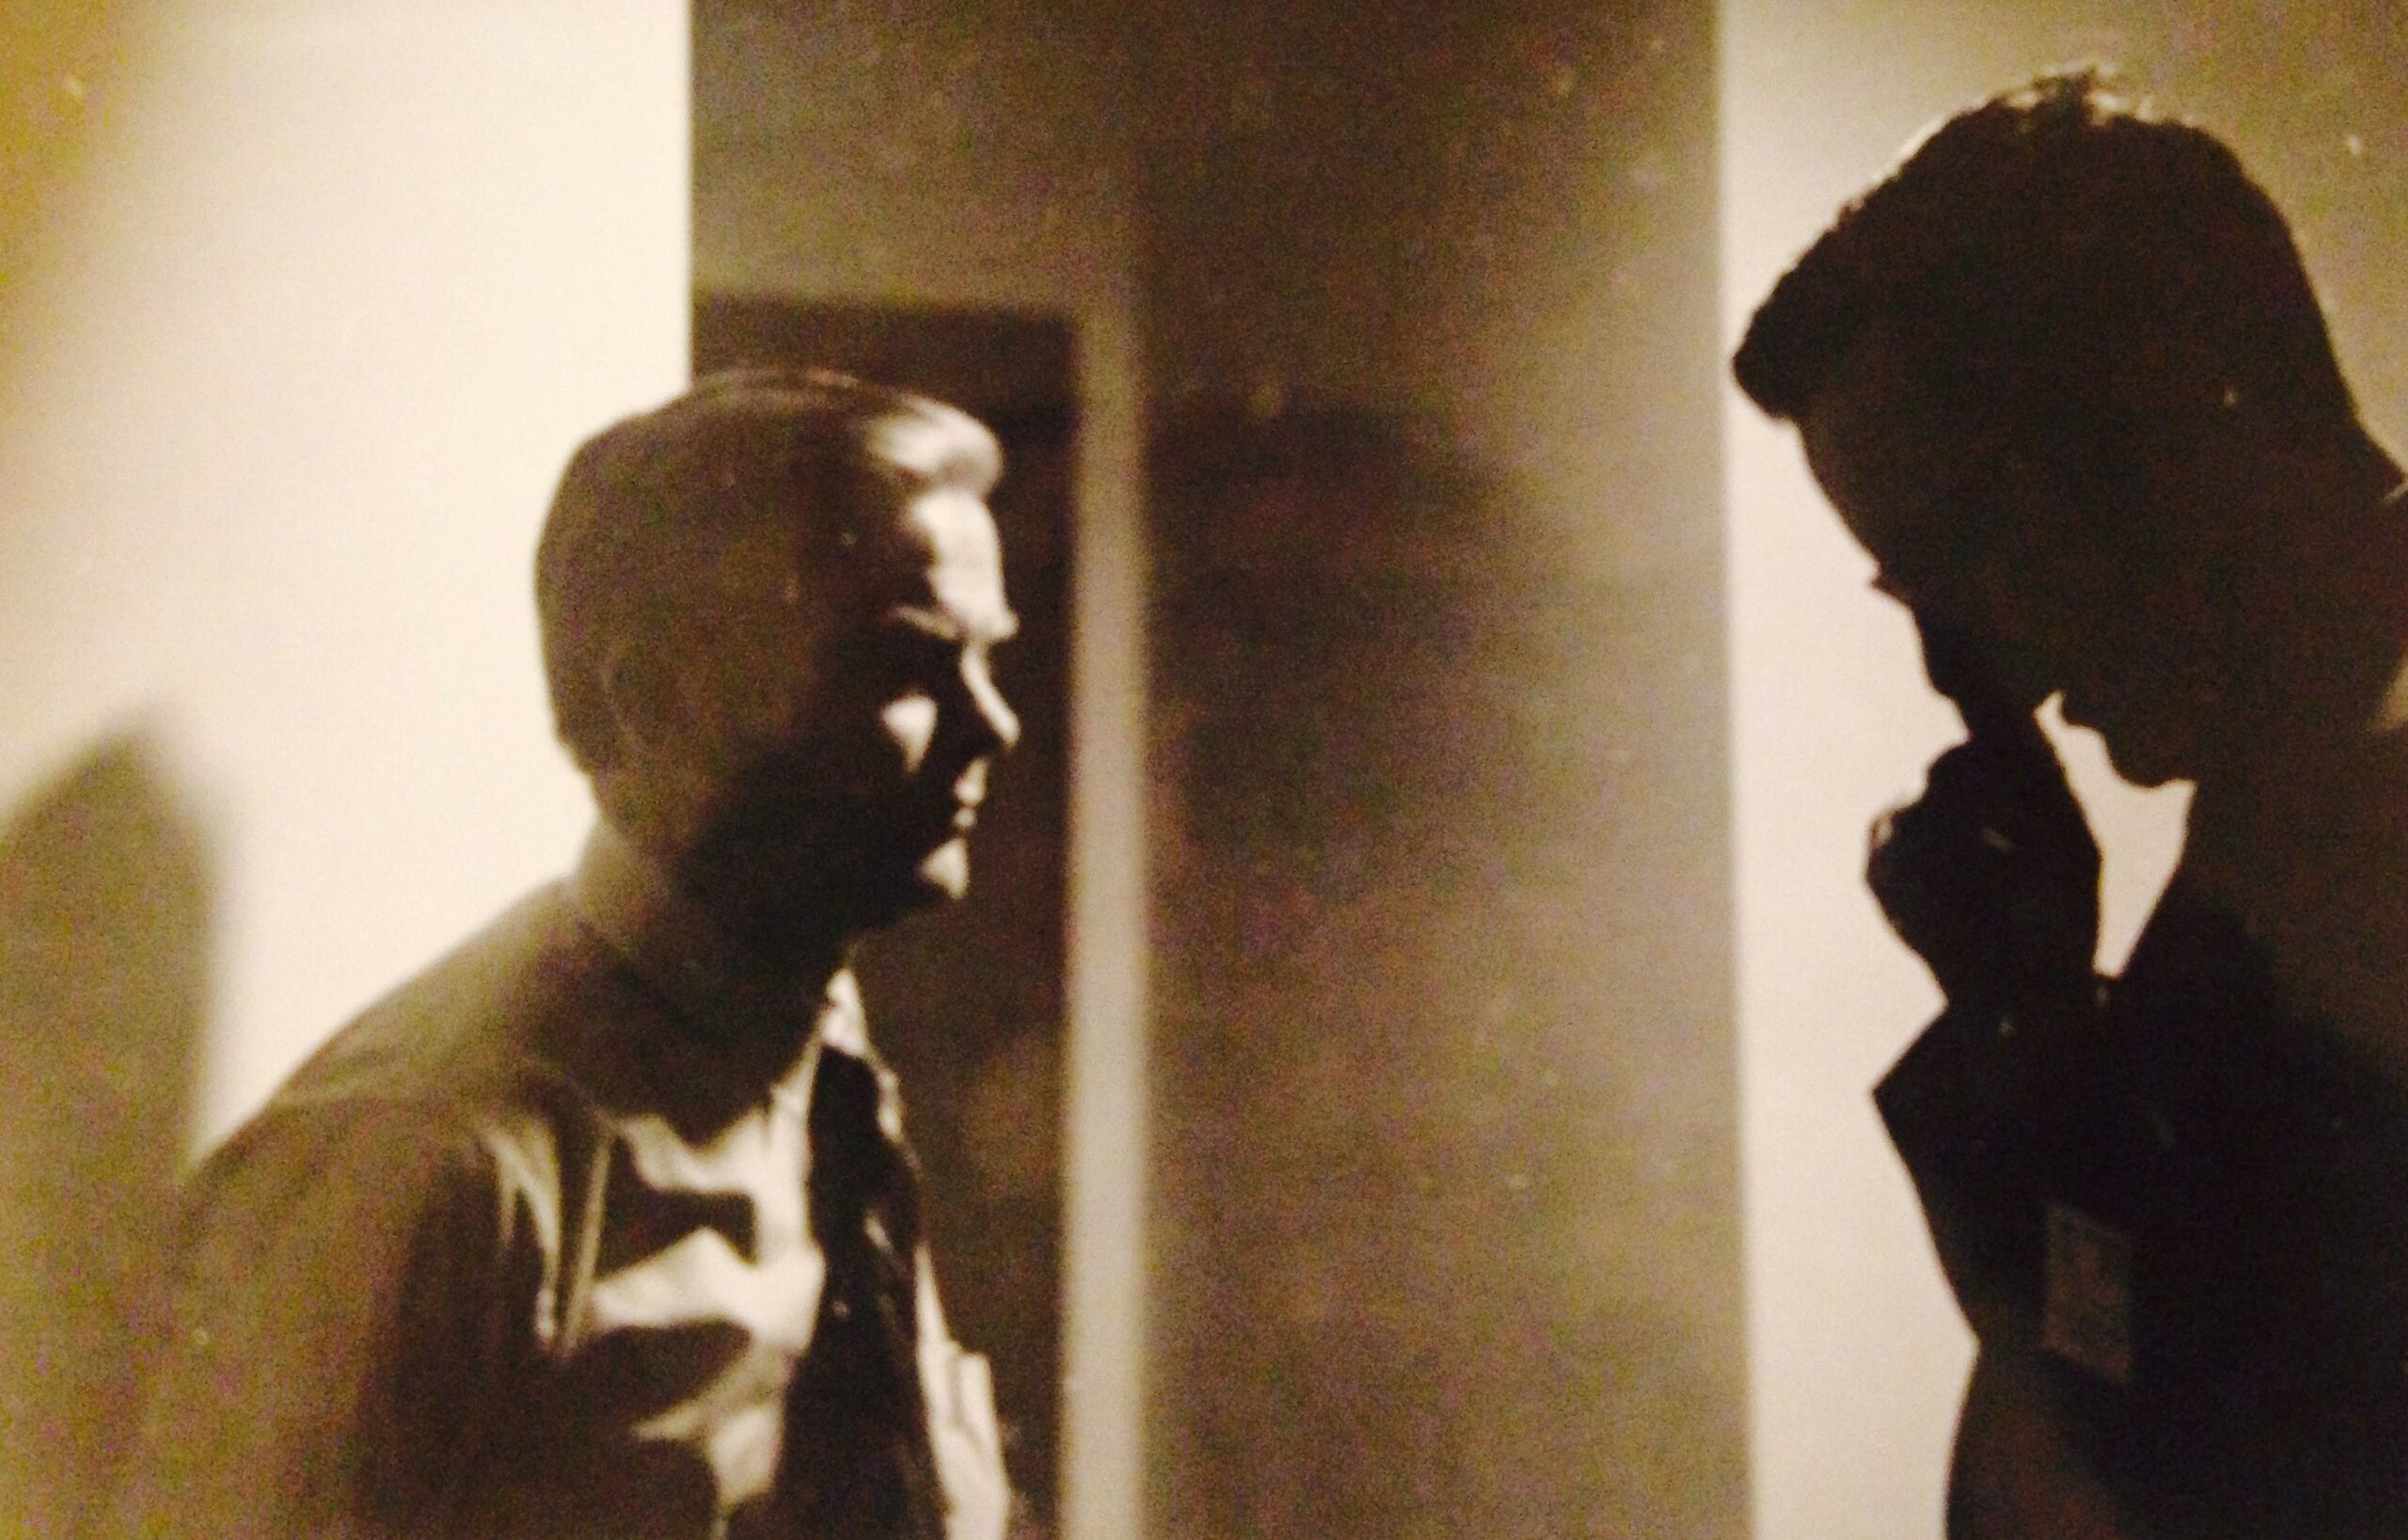 An old sepia image of men talking with each other in front of a doorway.